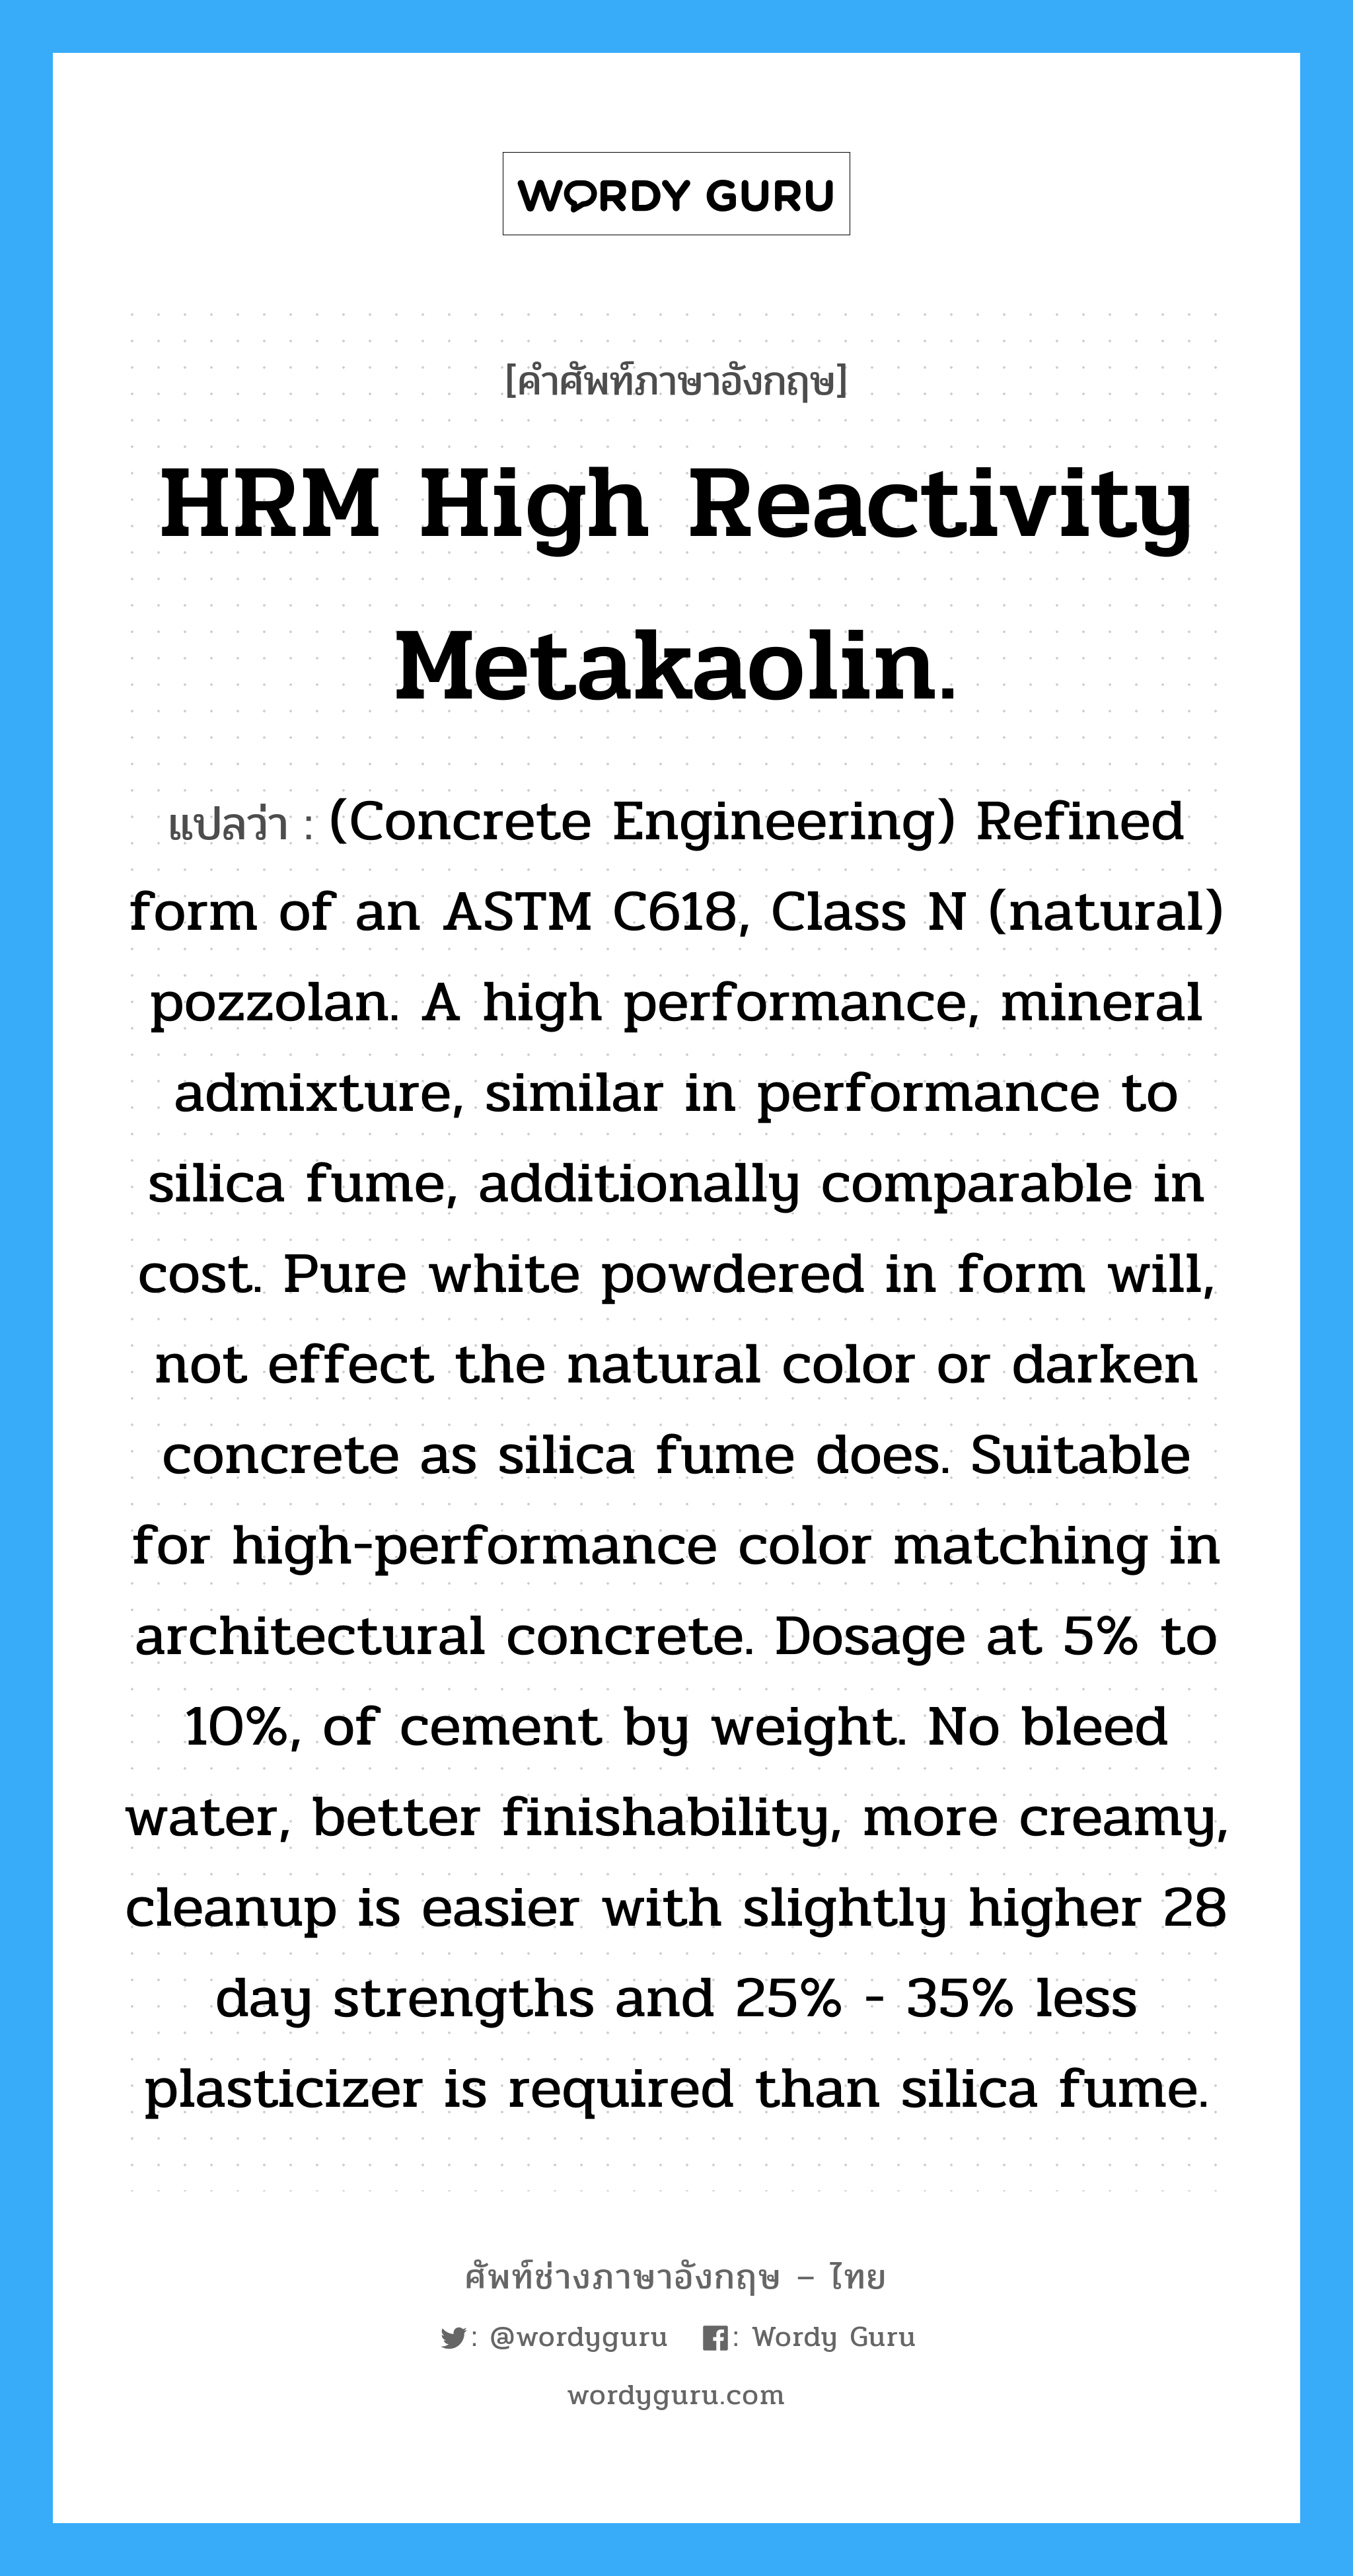 HRM High Reactivity Metakaolin. แปลว่า?, คำศัพท์ช่างภาษาอังกฤษ - ไทย HRM High Reactivity Metakaolin. คำศัพท์ภาษาอังกฤษ HRM High Reactivity Metakaolin. แปลว่า (Concrete Engineering) Refined form of an ASTM C618, Class N (natural) pozzolan. A high performance, mineral admixture, similar in performance to silica fume, additionally comparable in cost. Pure white powdered in form will, not effect the natural color or darken concrete as silica fume does. Suitable for high-performance color matching in architectural concrete. Dosage at 5% to 10%, of cement by weight. No bleed water, better finishability, more creamy, cleanup is easier with slightly higher 28 day strengths and 25% - 35% less plasticizer is required than silica fume.